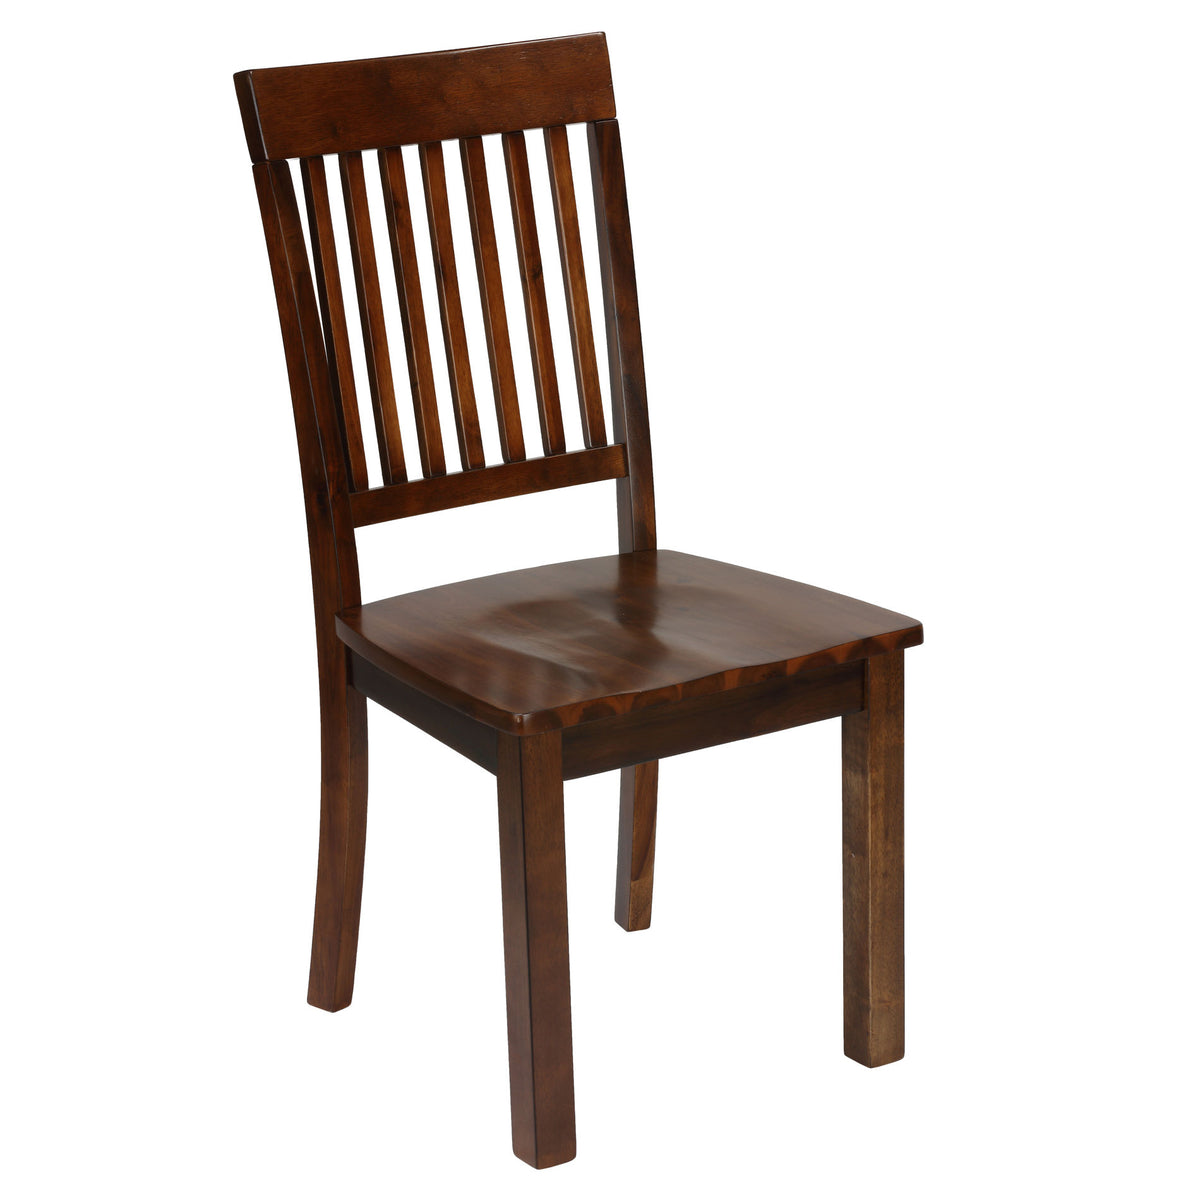 Cortesi Home Kingston Mission Style Dining Chairs in Solid Wood Walnut Finish, Set of 2